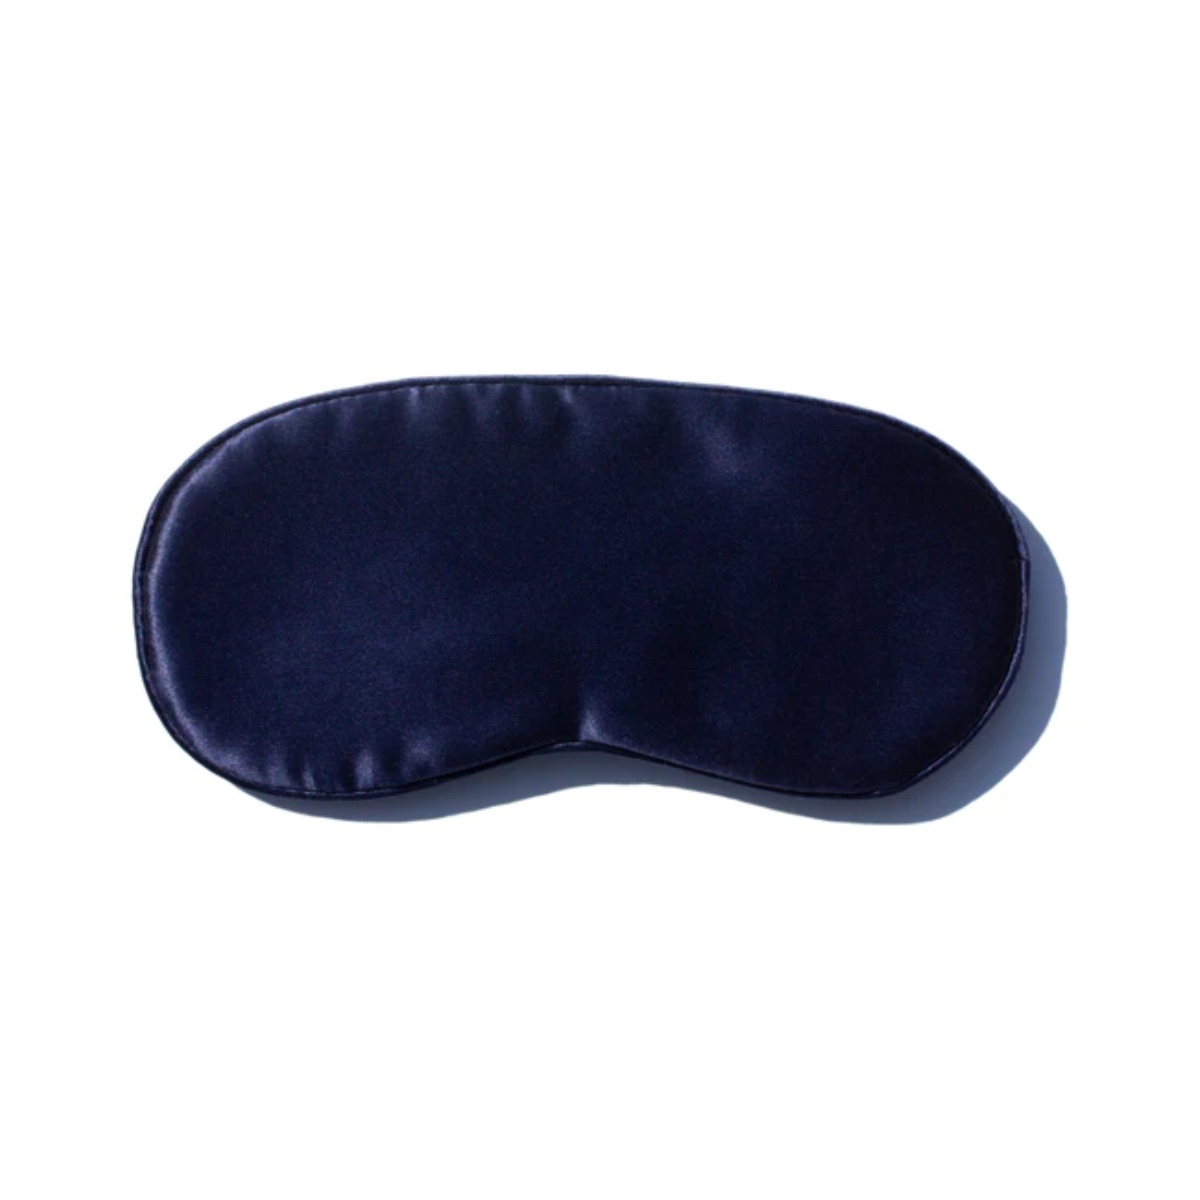 21. Sleep Mask: The Ultimate Relaxation Gift for a Blissful 15 Year Anniversary Celebration